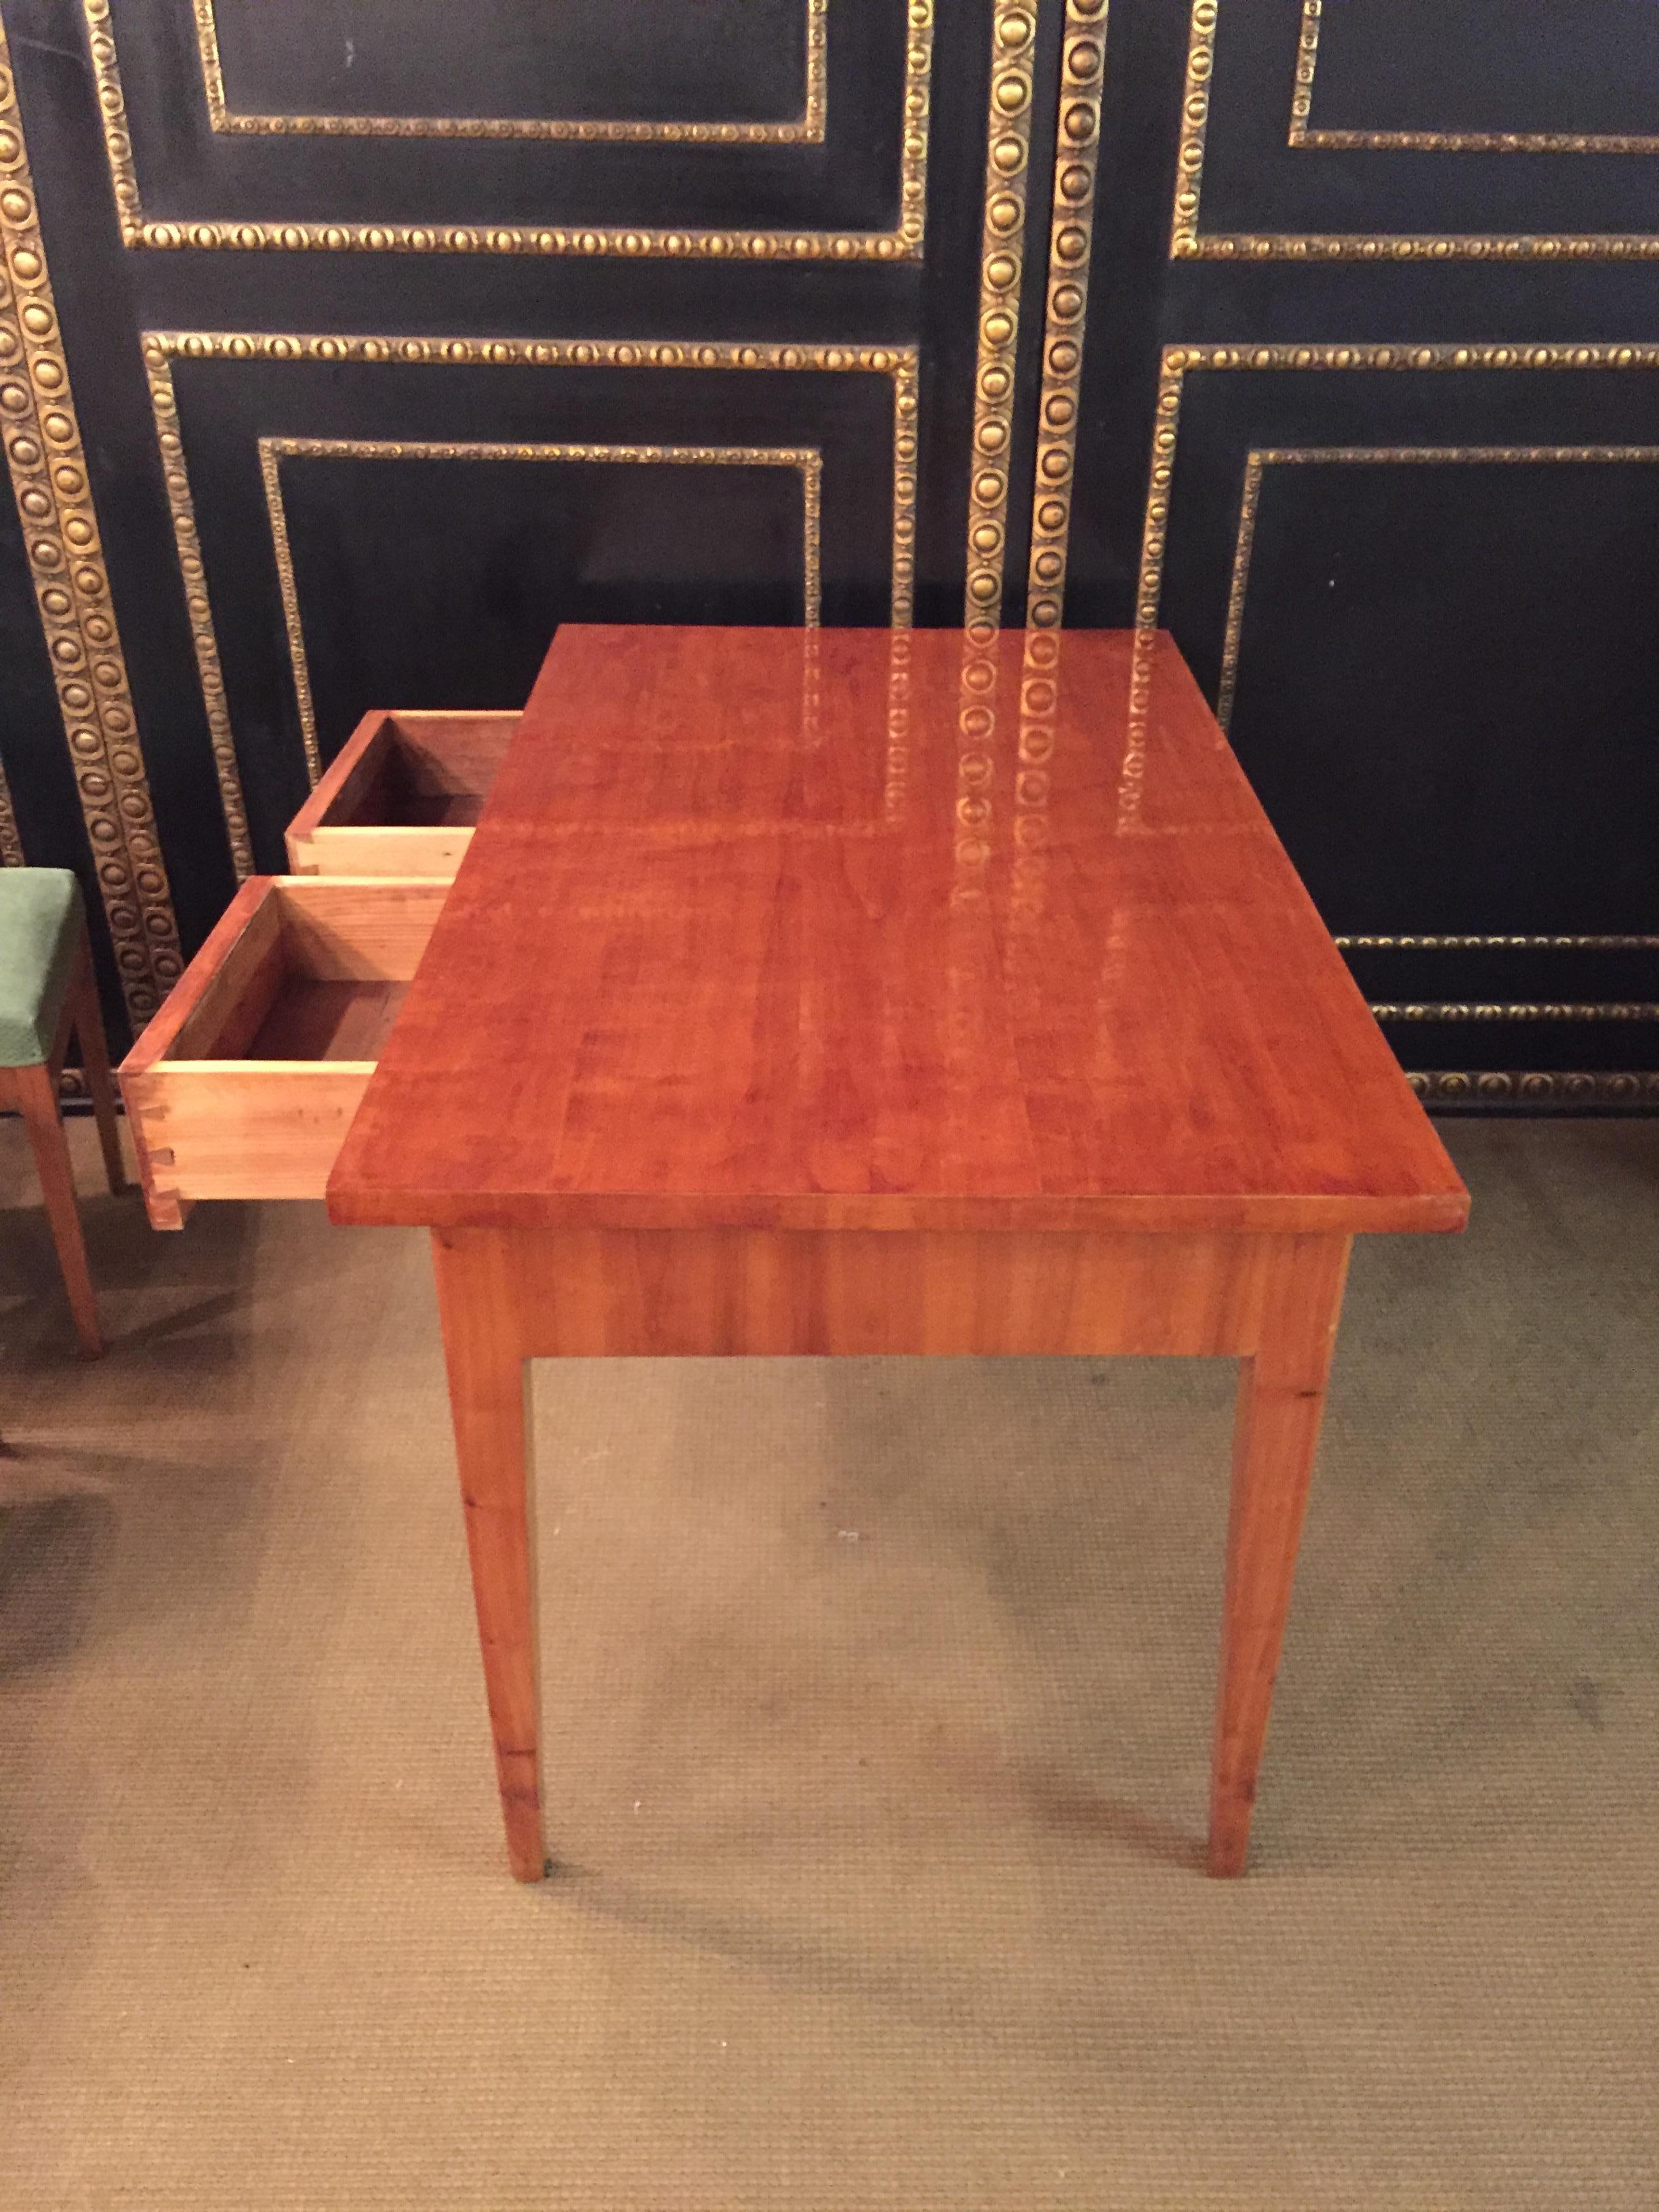 19th Century Original Biedermeier Dining Room /Dining Table with 4 Chairs Cherry 2